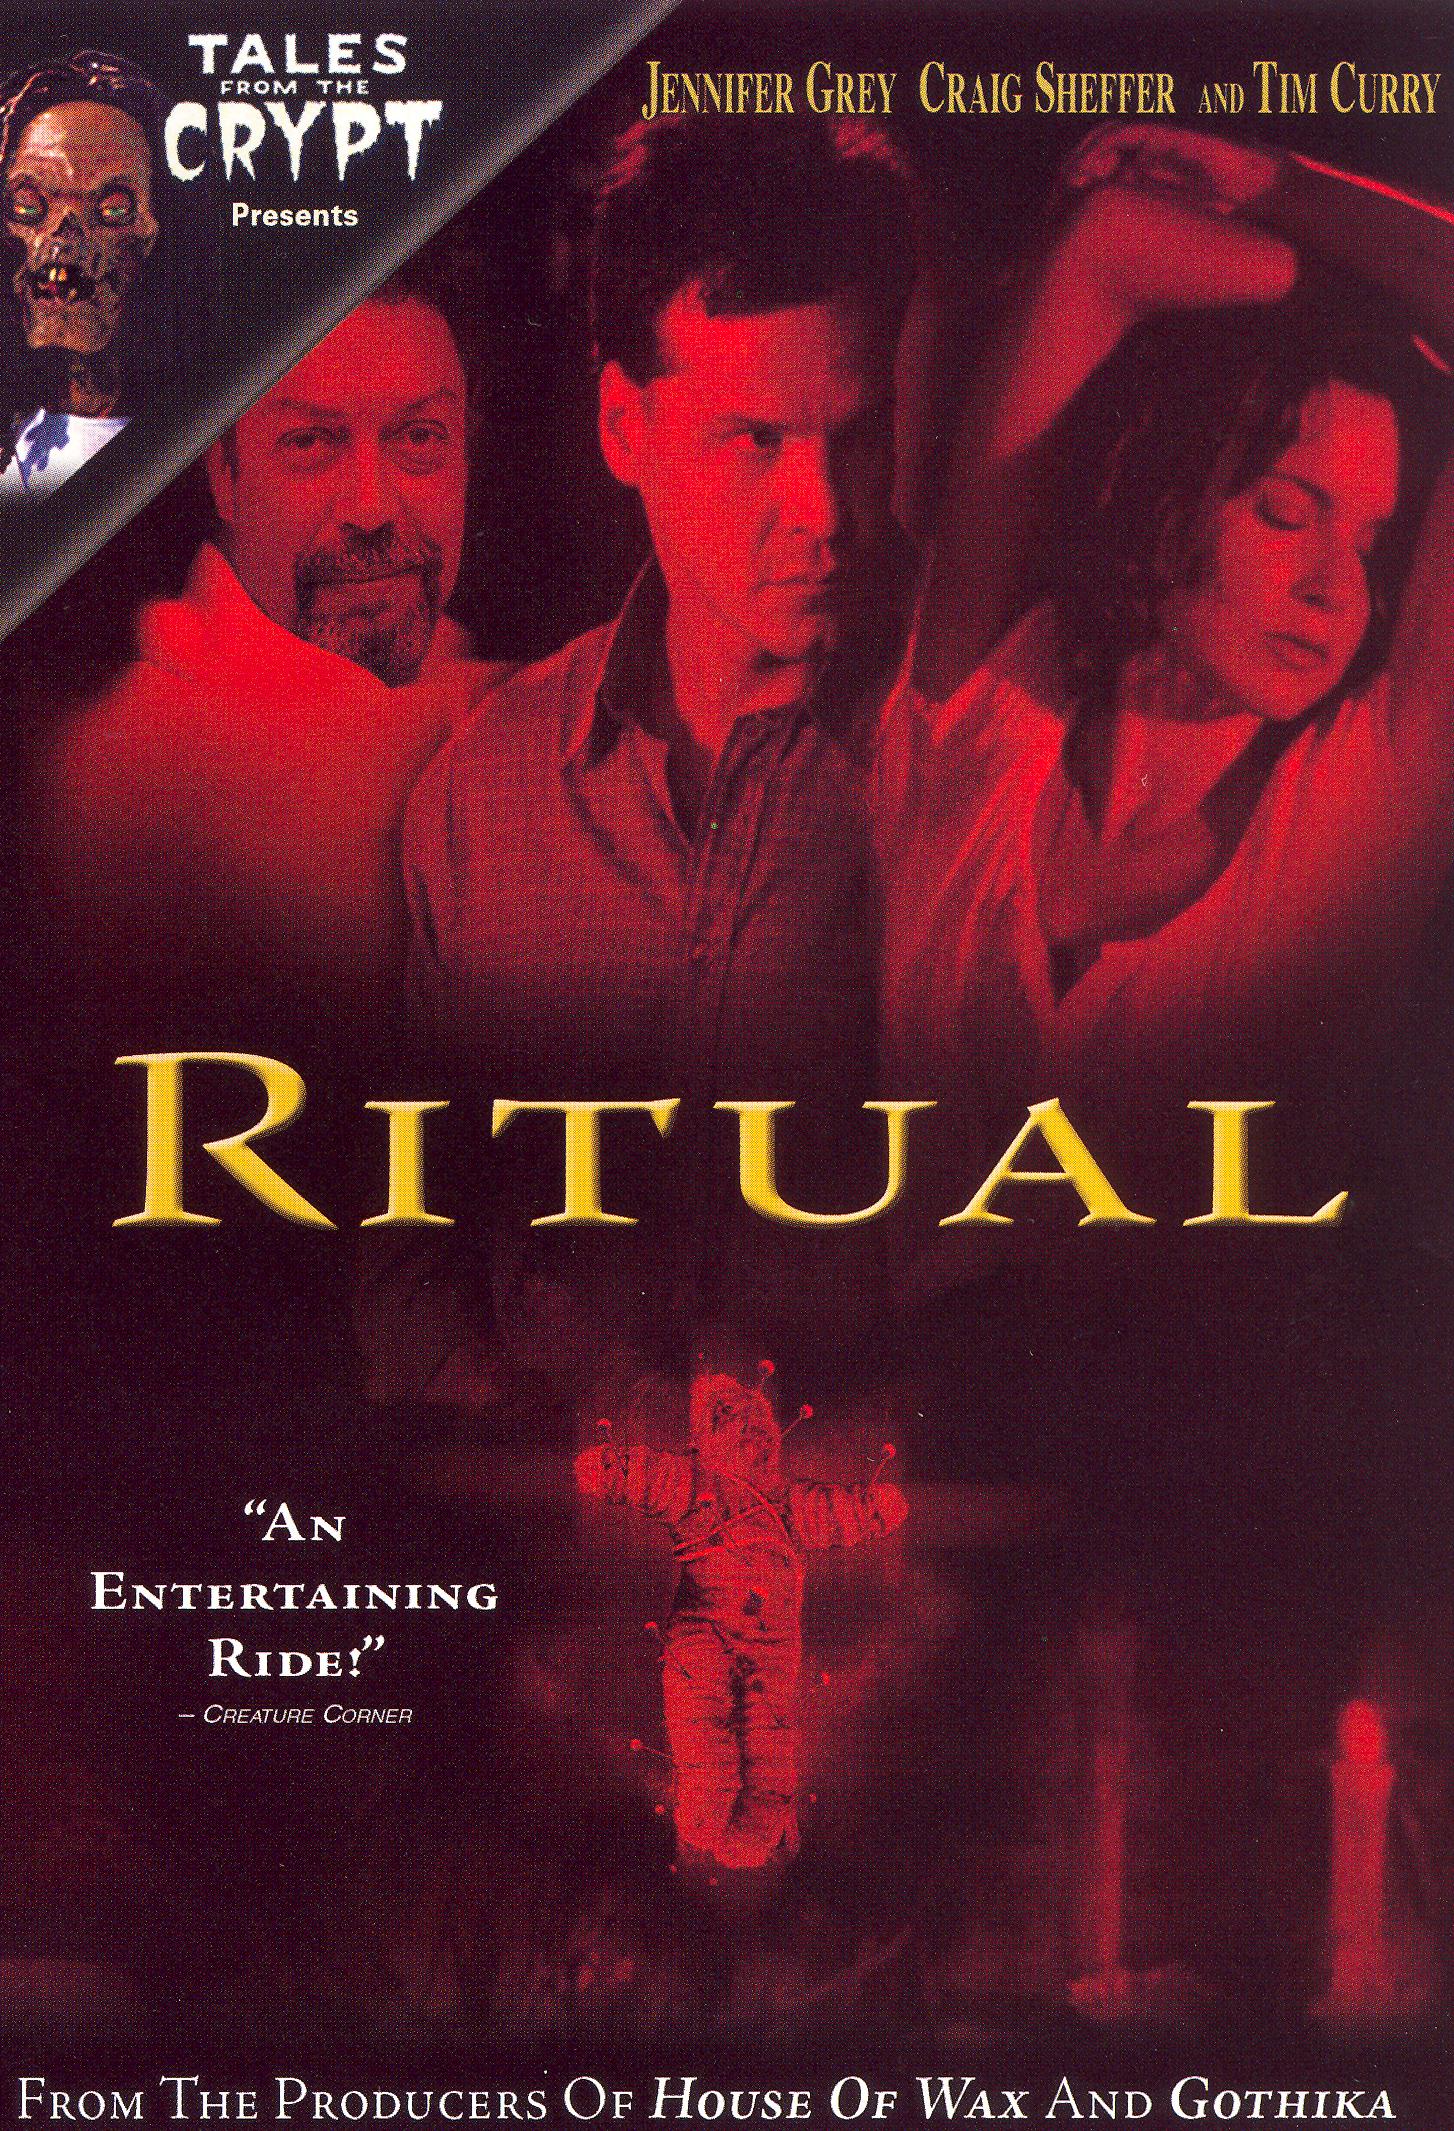 Ritual tales from the crypt